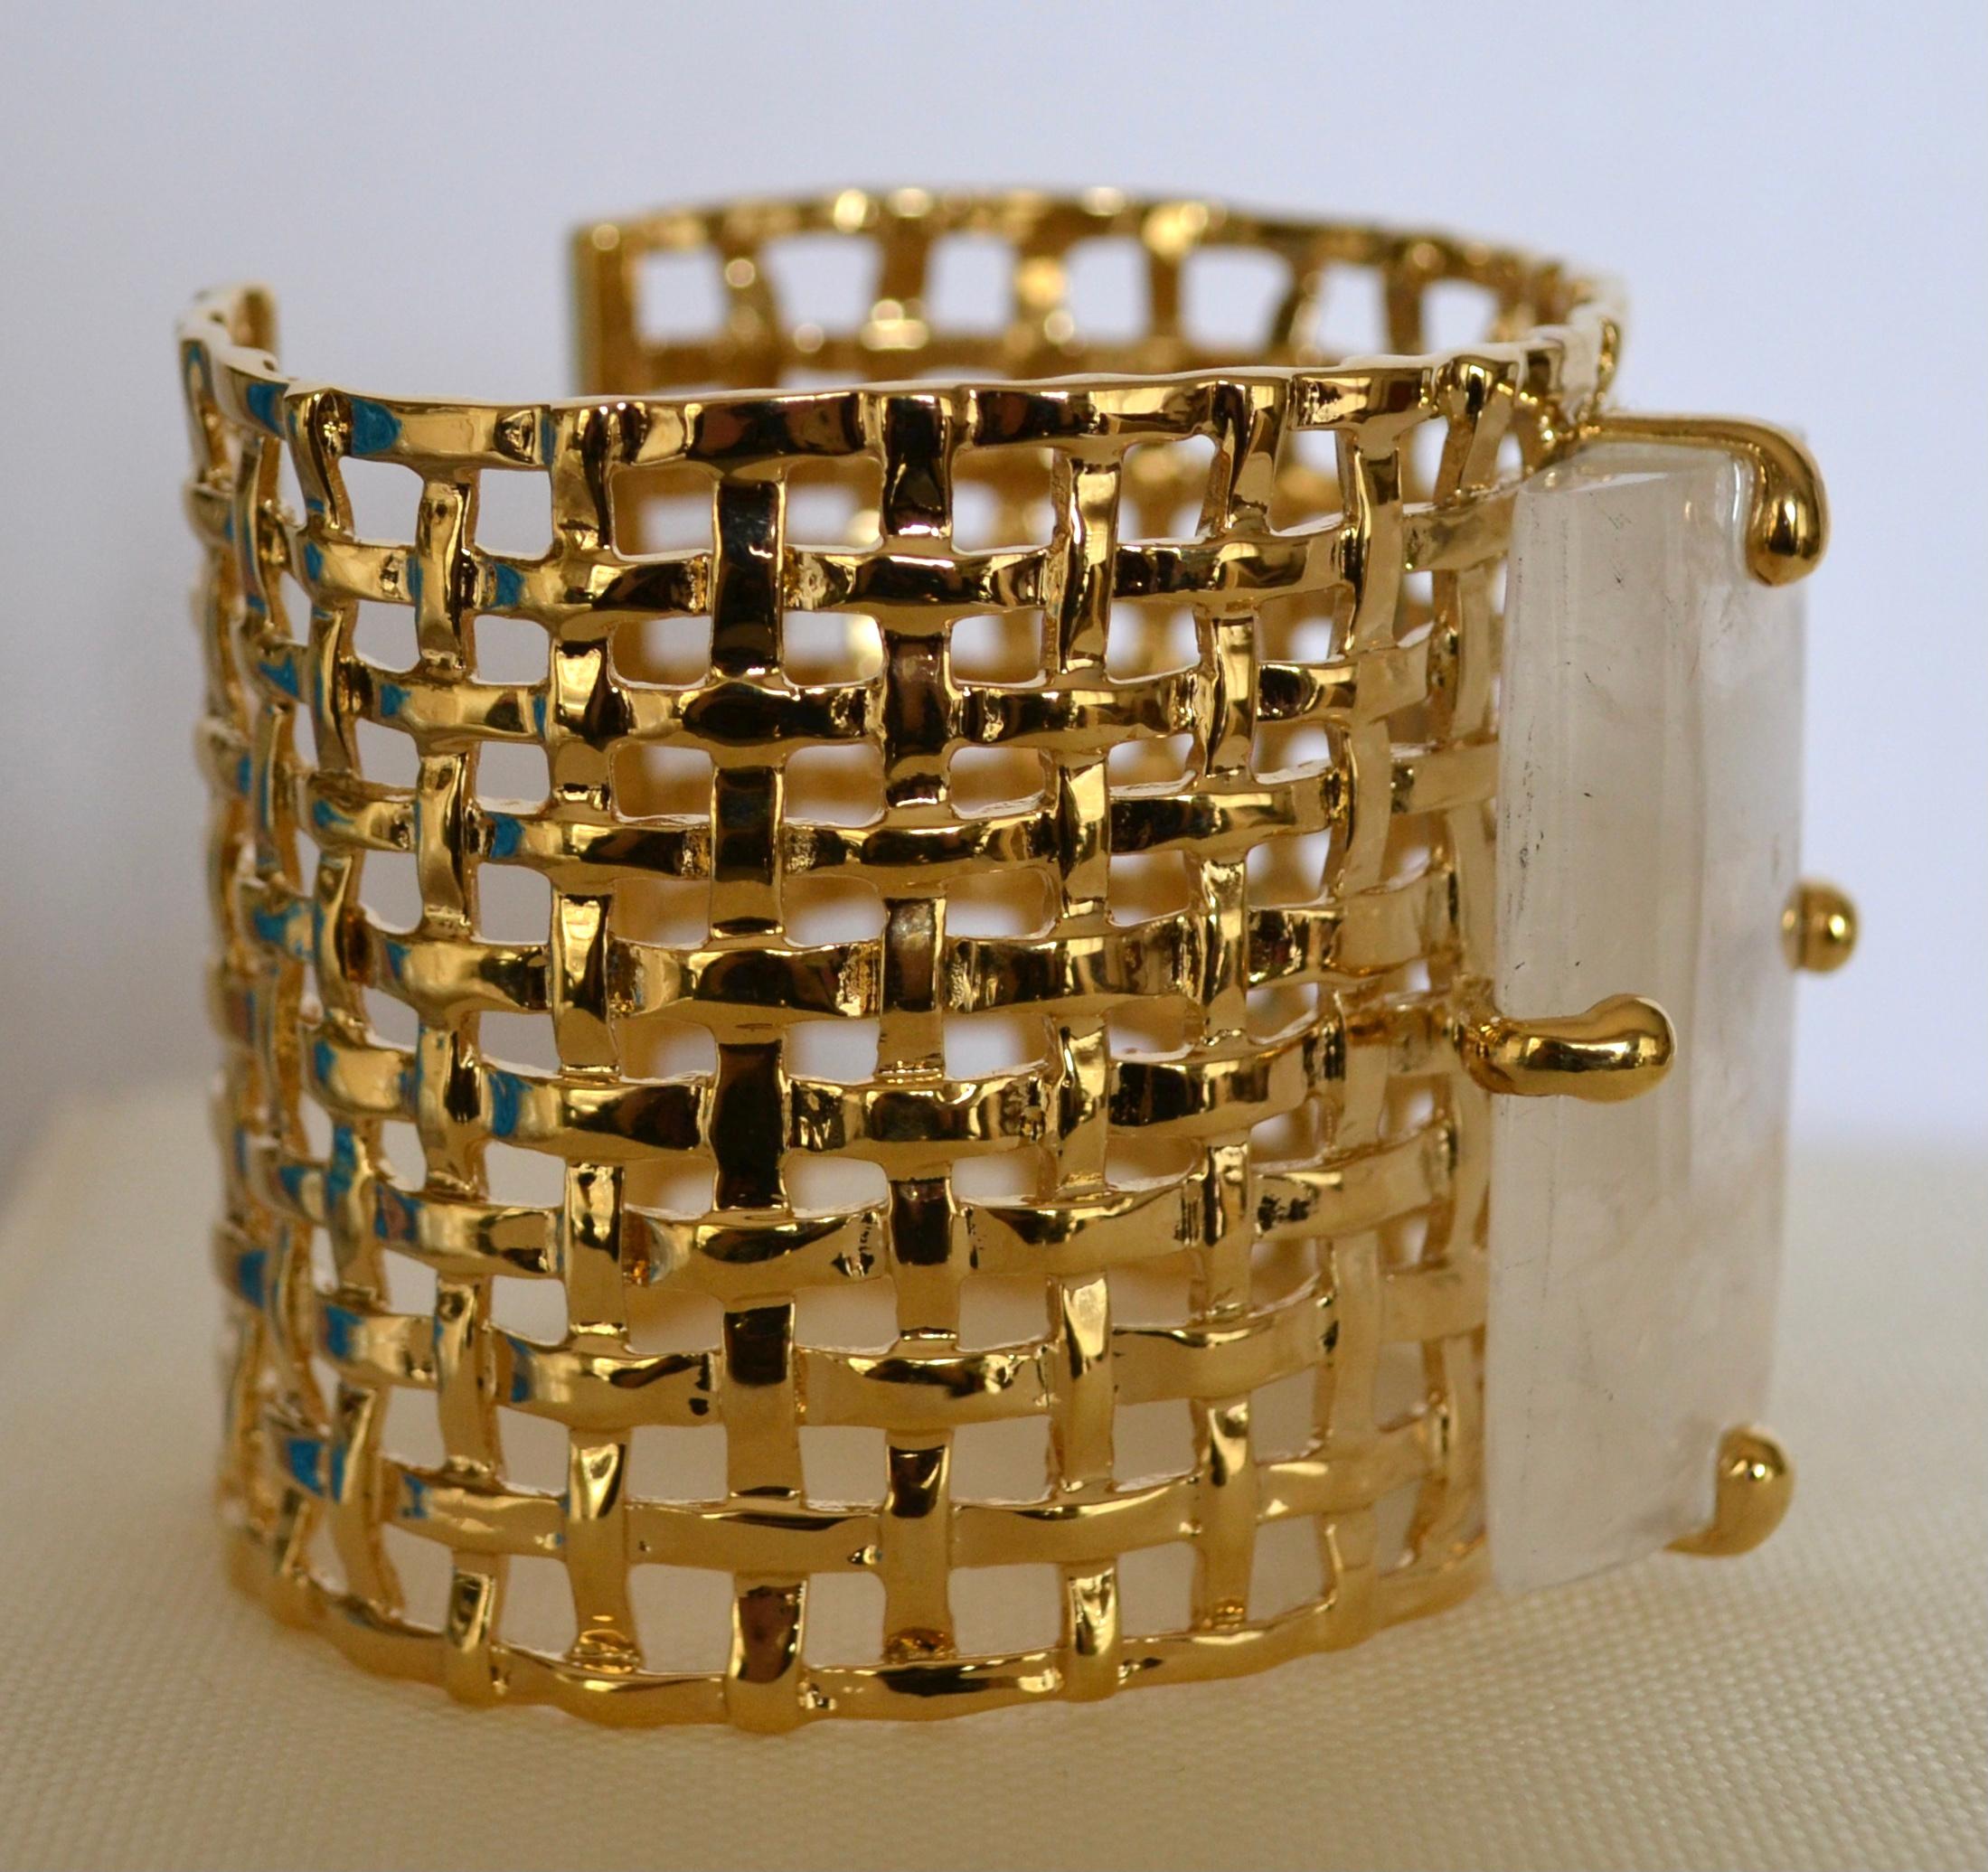 24-carat gilded bronze metal designed in a basket weave motif  adorned with a sizable rectangular rock crystal. The size can be adjusted.
This designer was Robert Goossens personal assistant in all of his creations. She worked by his side for 20